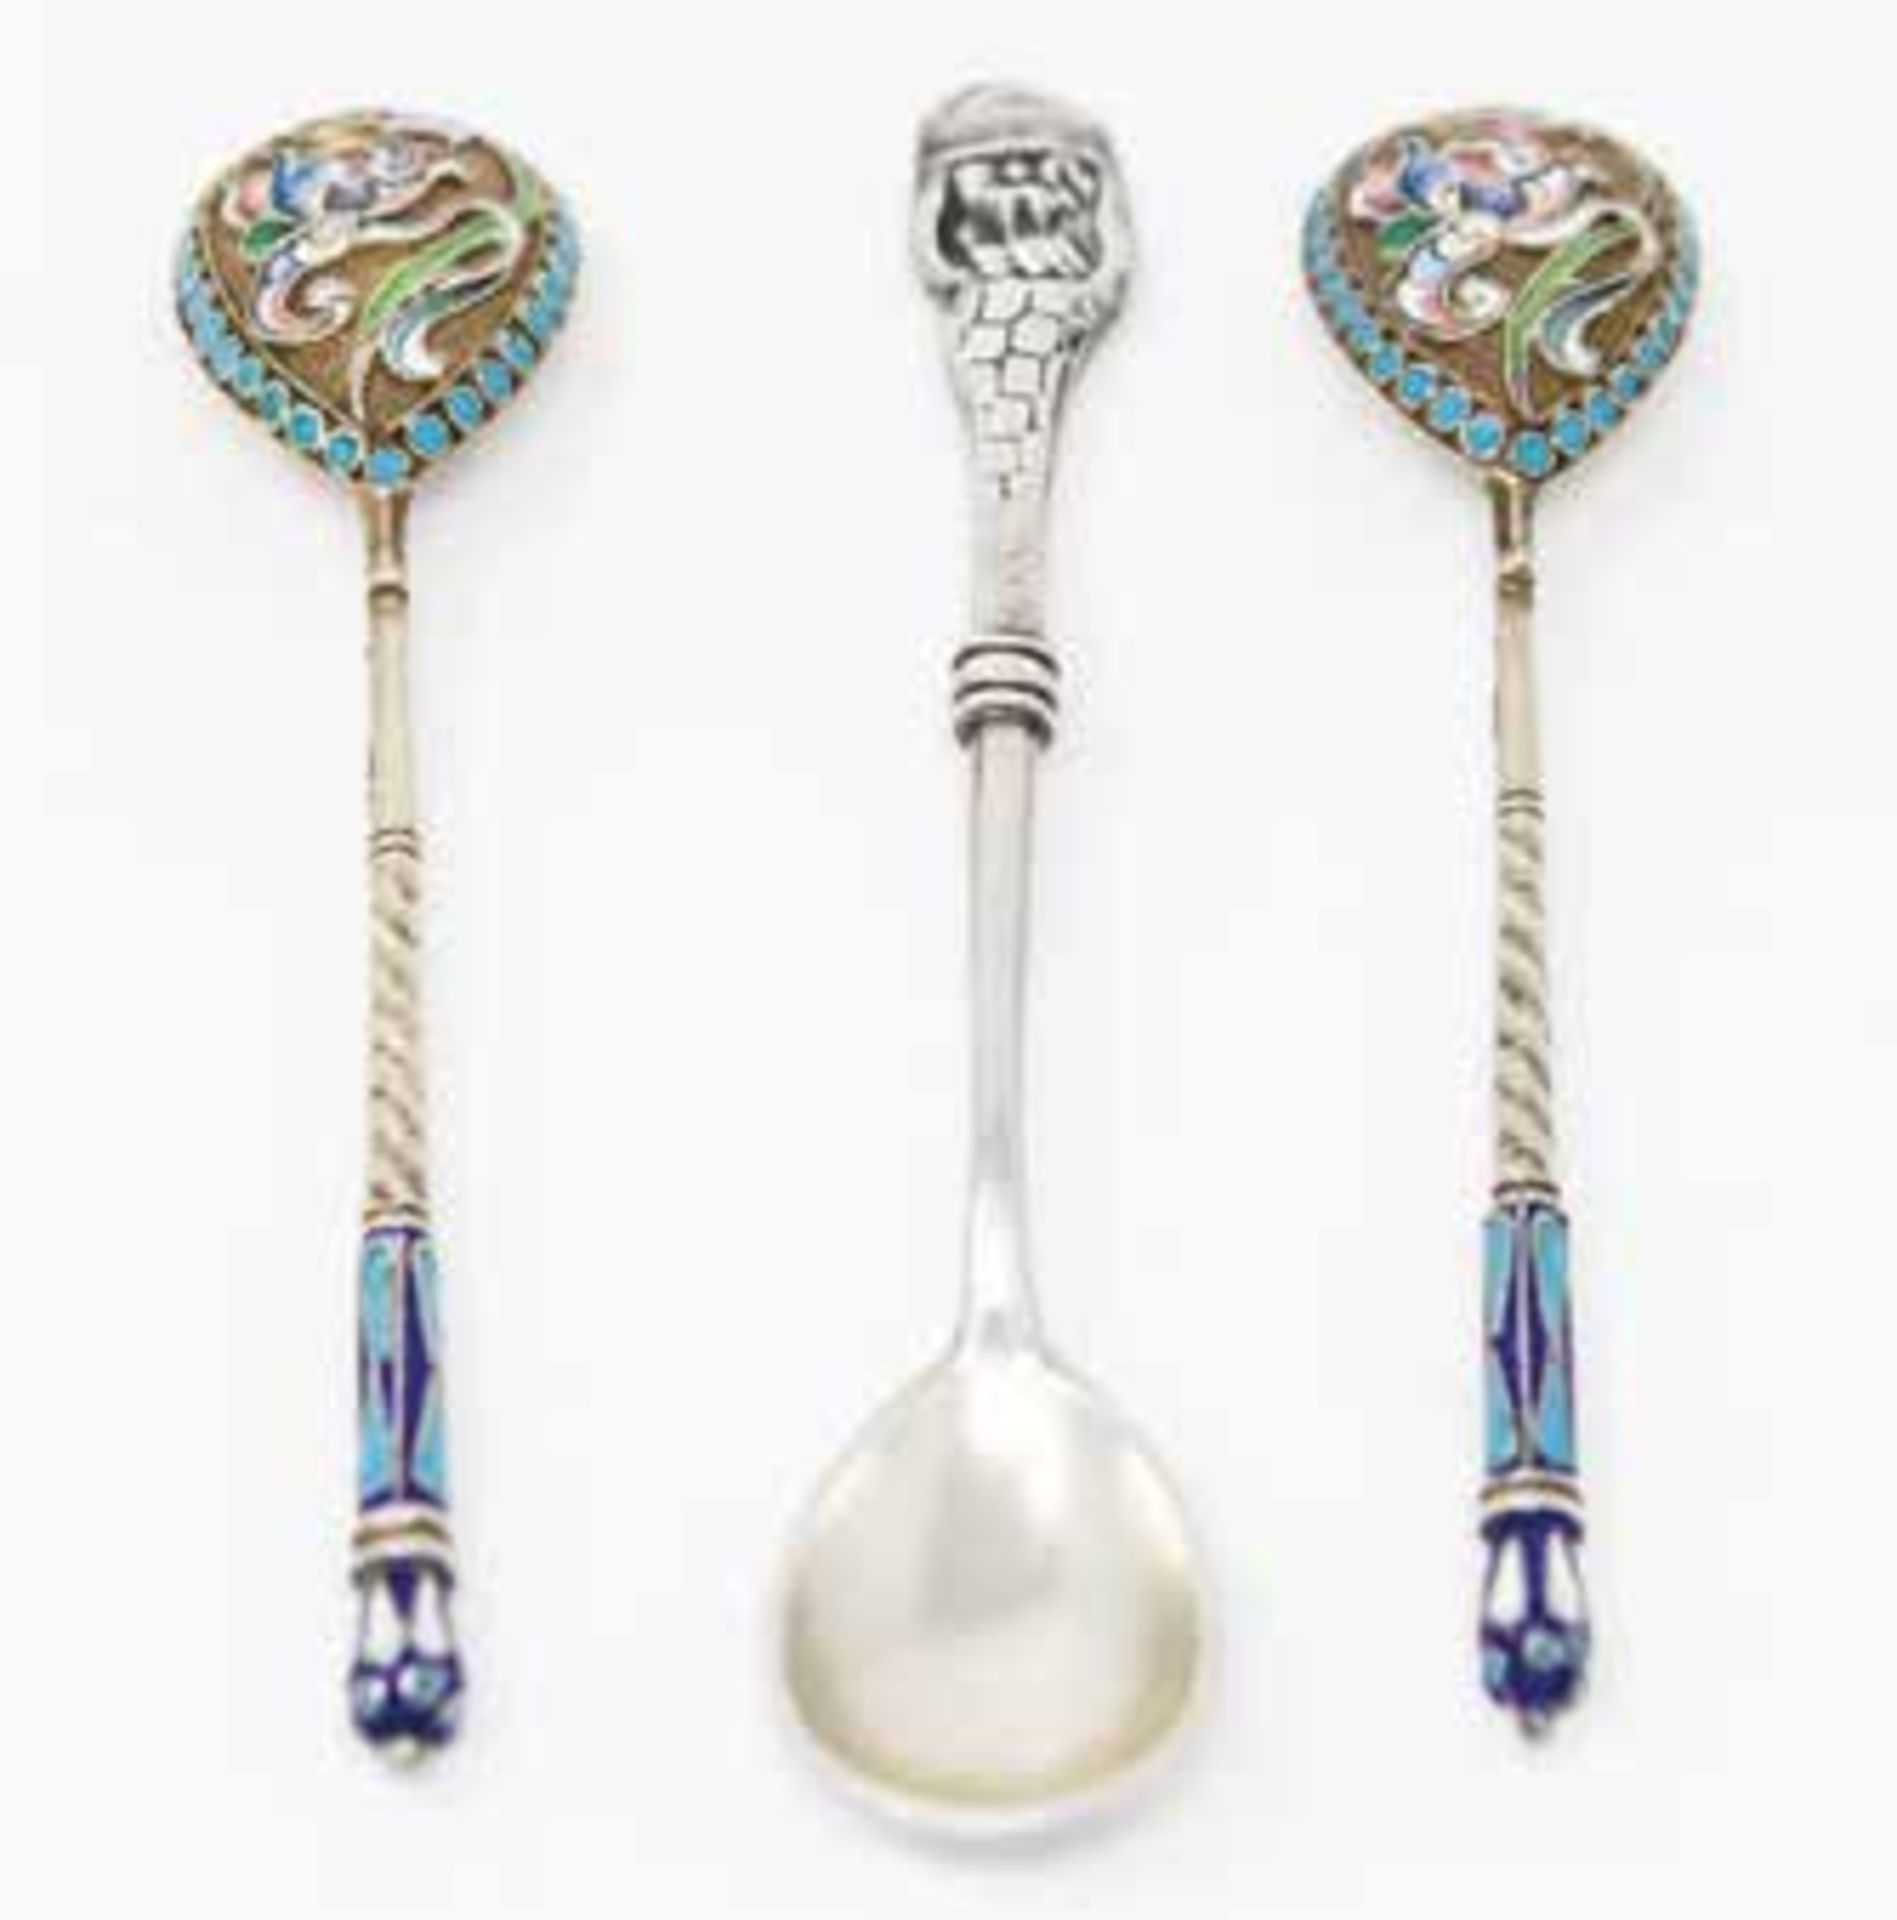 3 teaspoons: Two with painted enamel on the filigree and one with a decorative pen [...] - Bild 2 aus 2